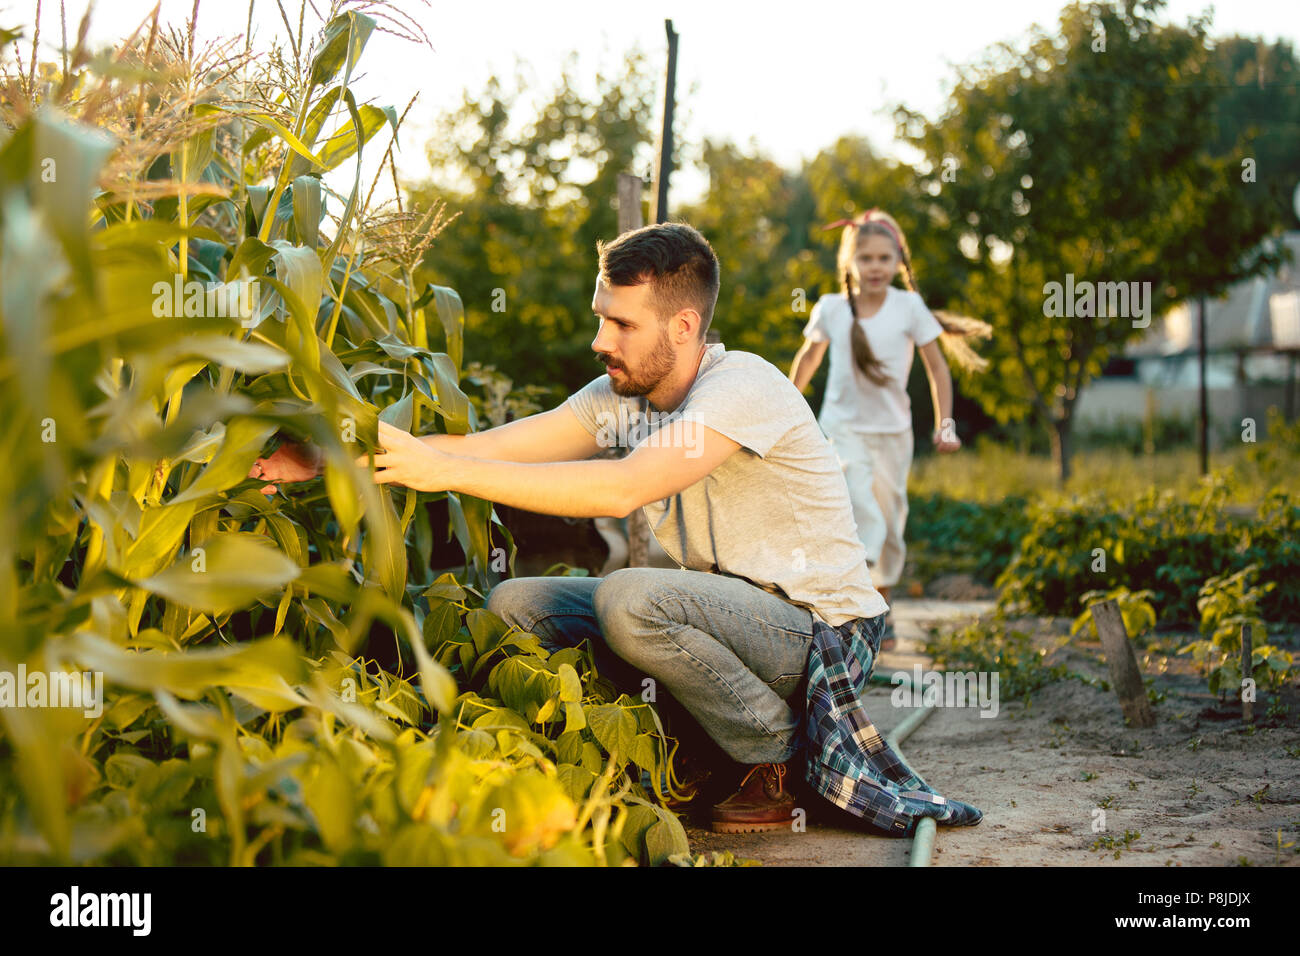 The happy young family during picking corns in a garden outdoors Stock Photo